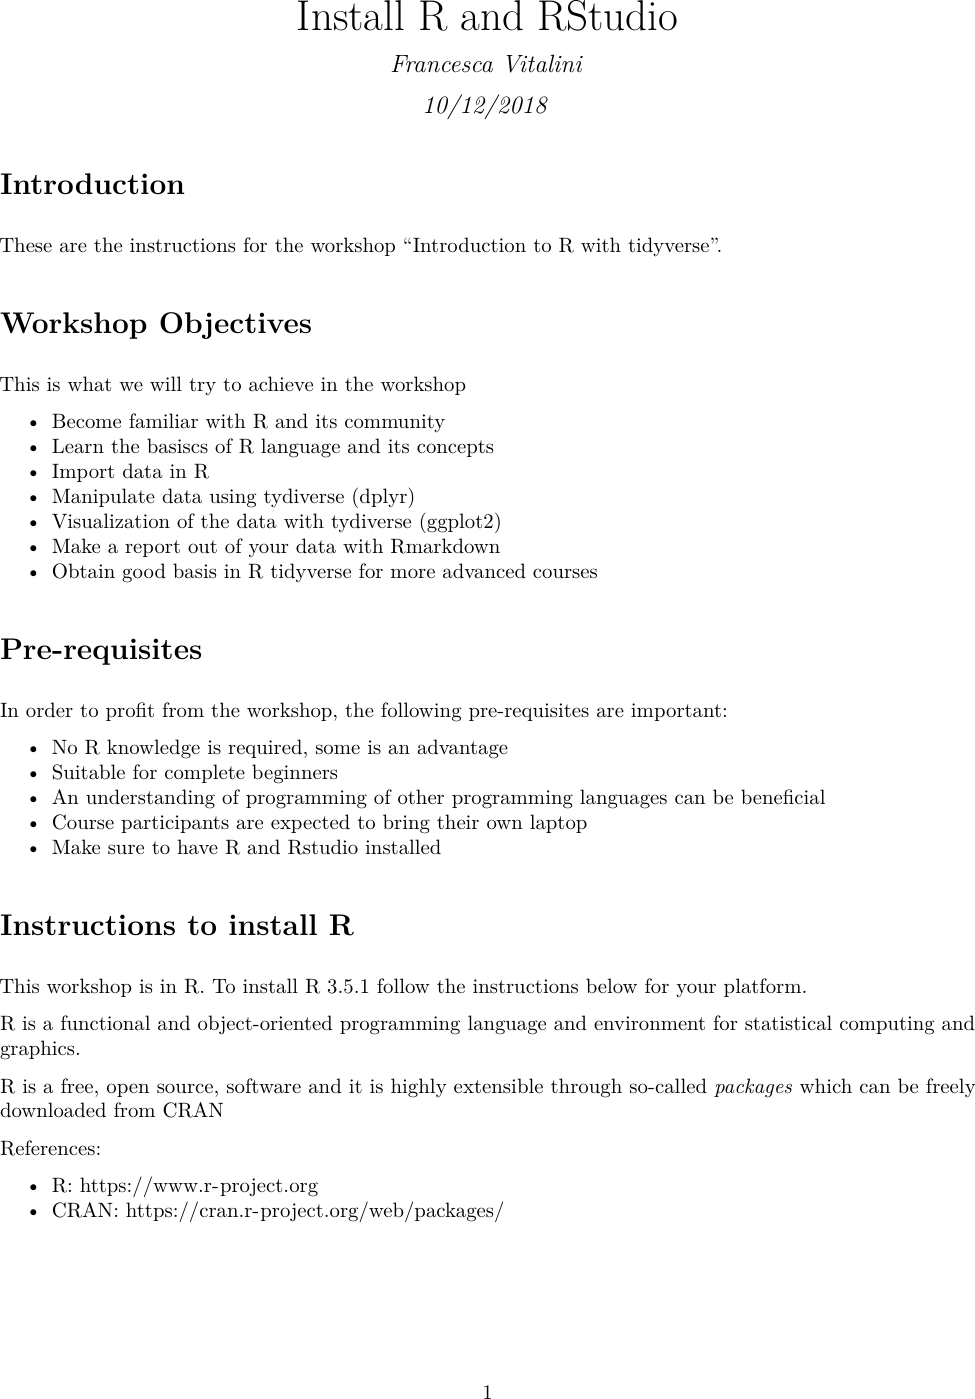 Page 1 of 10 - Install R And RStudio Instructions